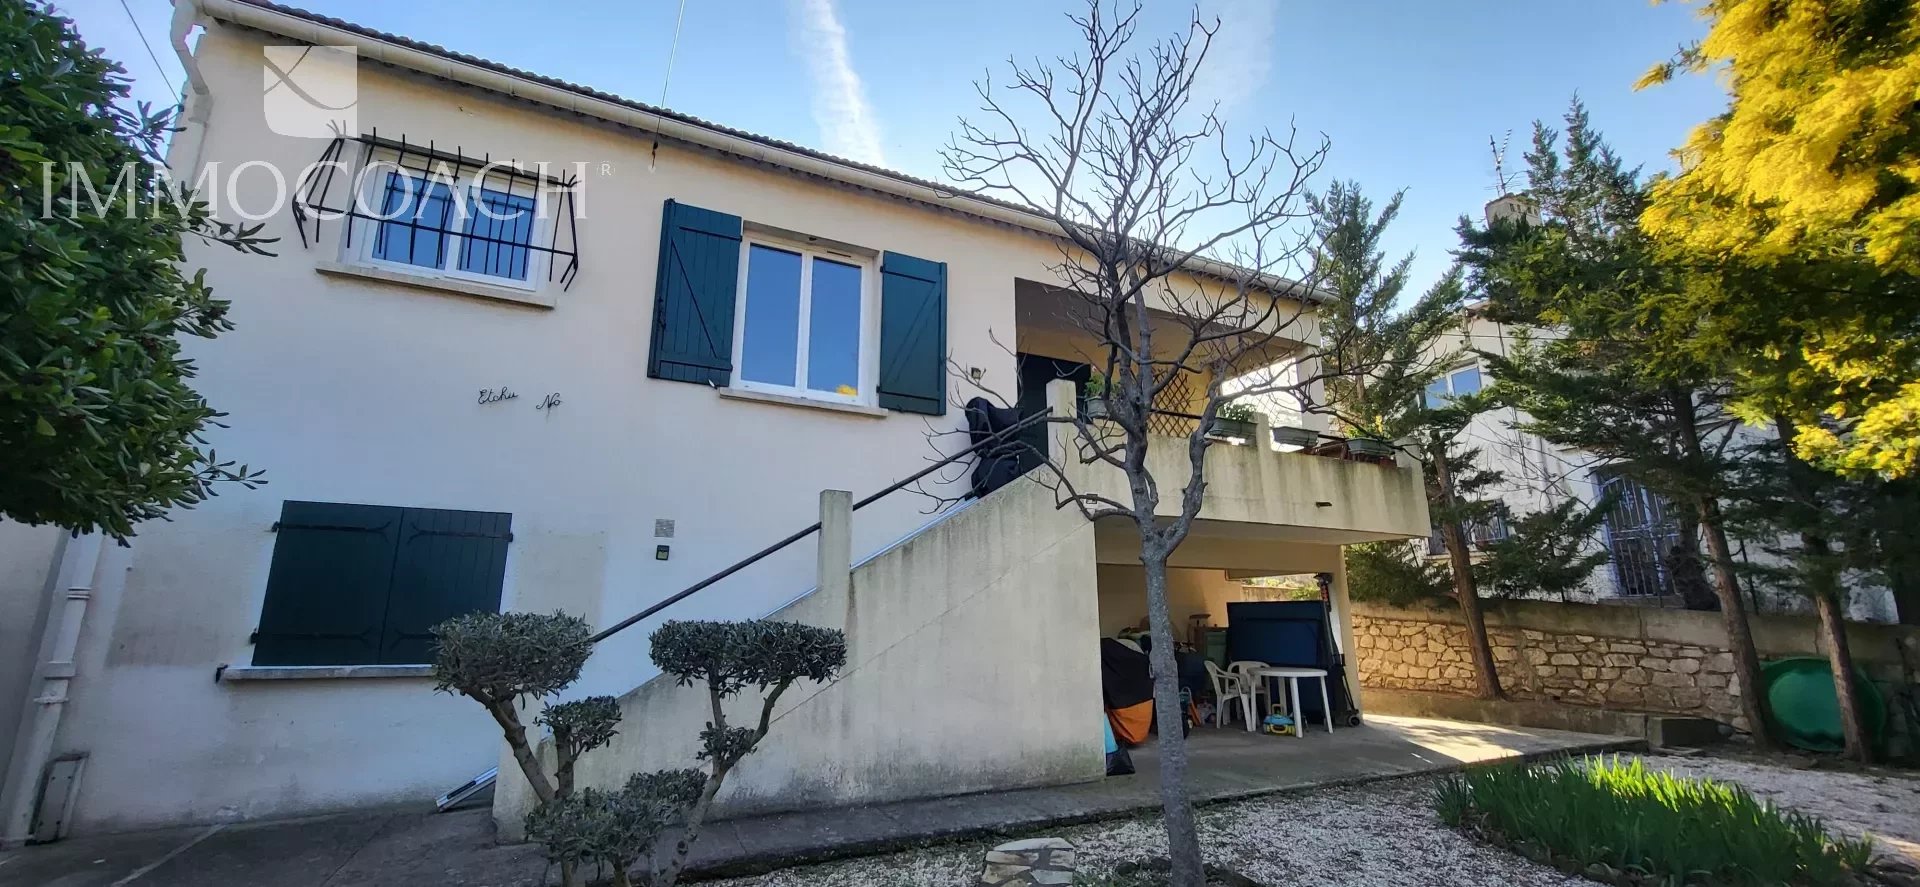 House to renovate in Mourillon, rare rental potential, ideal investor.